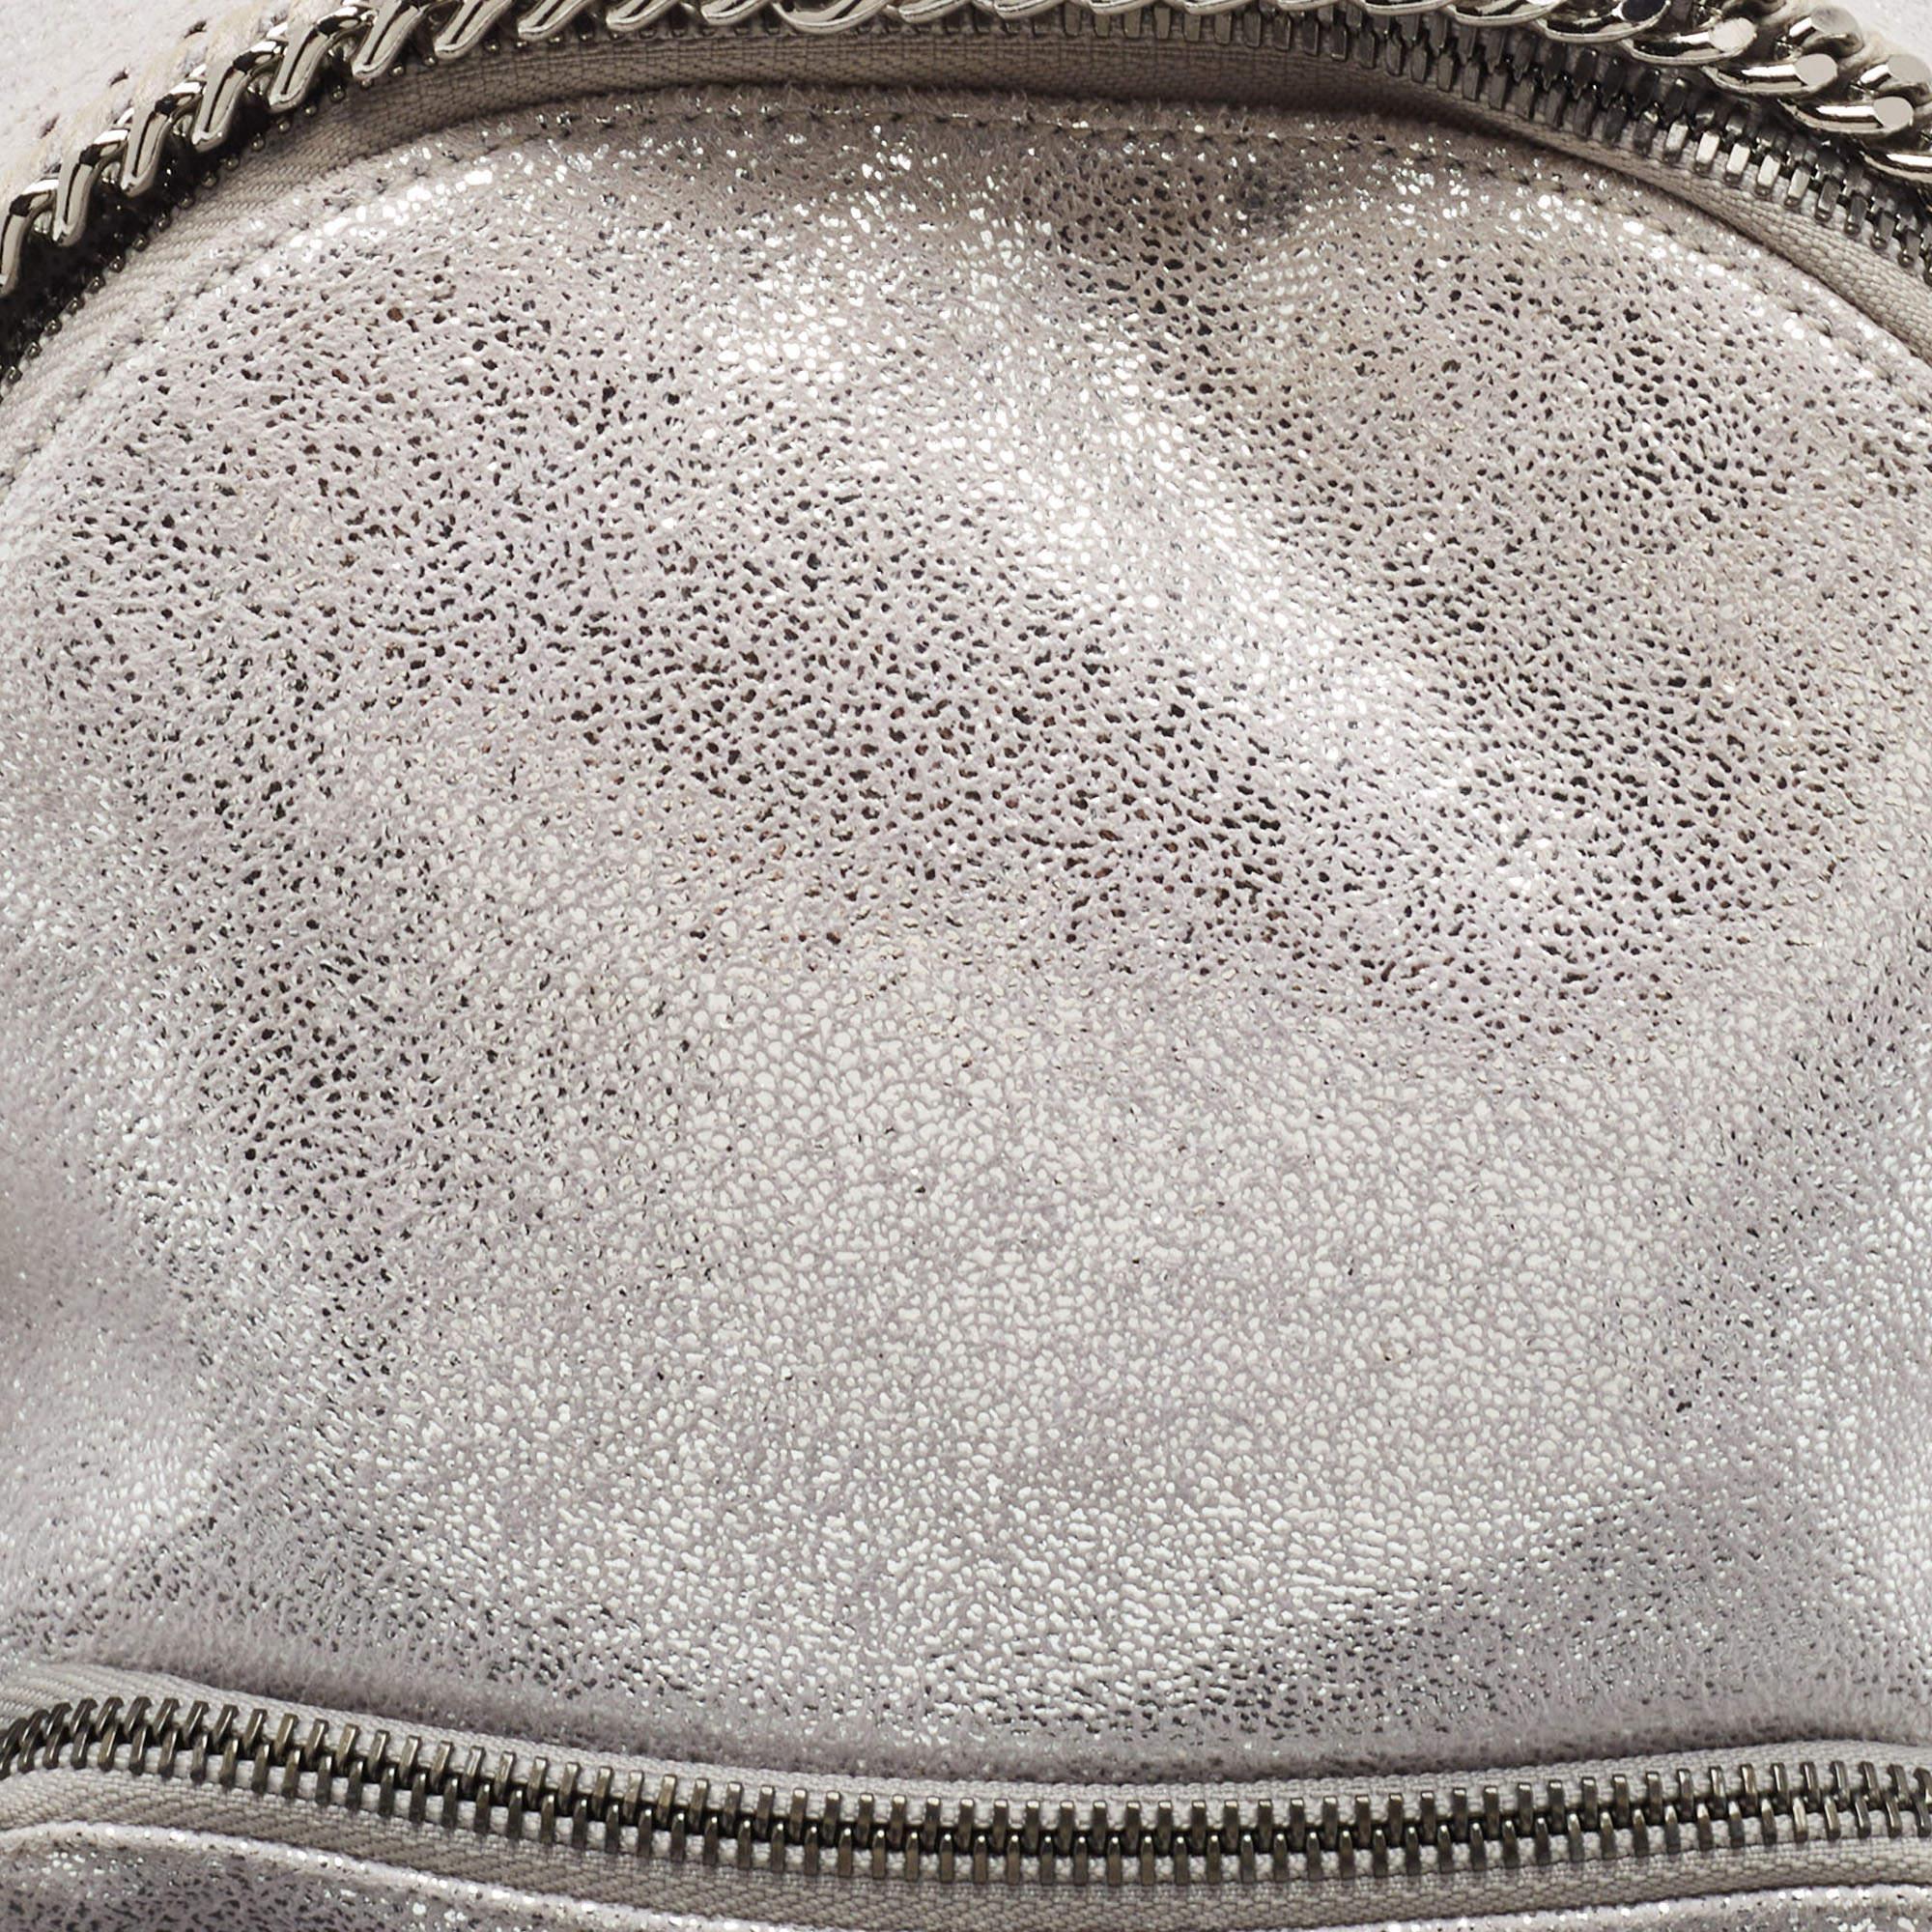 Stella McCartney Silver Faux Leather Falabella Backpack 2